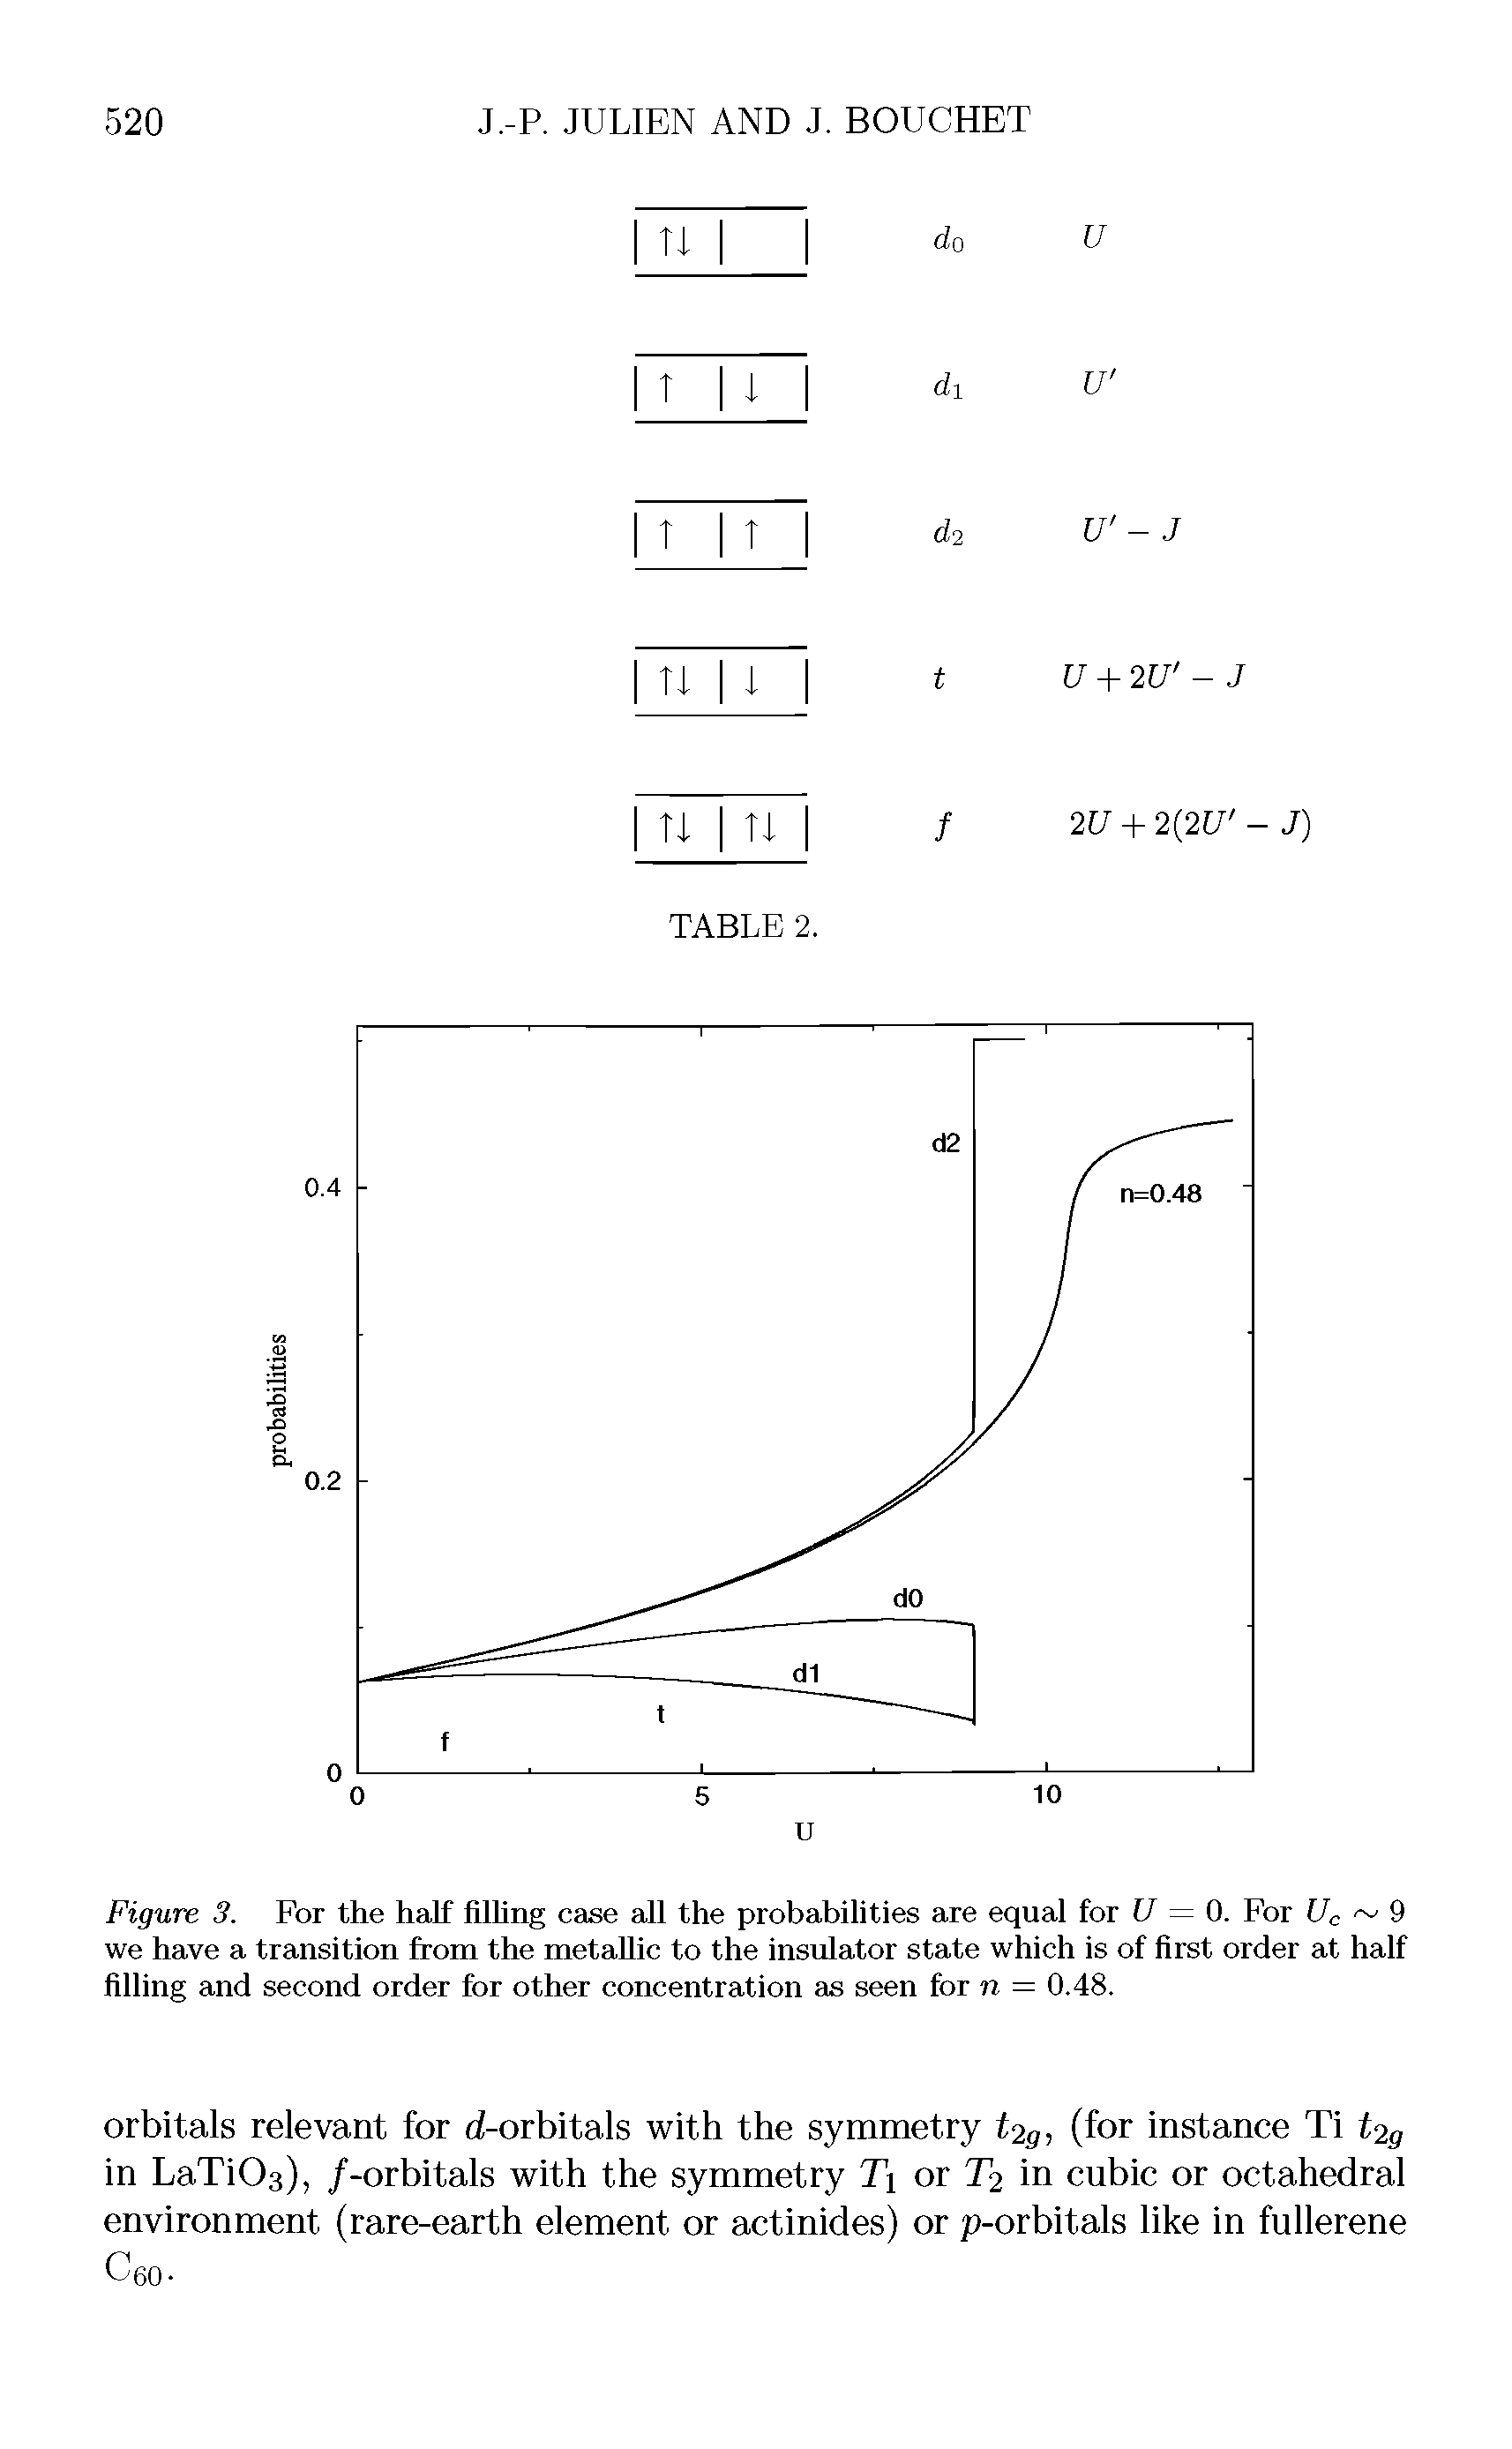 Figure 3. For the half filhng case all the probabilities are equal for U = 0. For Uc 9 we have a transition from the metallic to the insulator state which is of first order at half filling and second order for other concentration as seen for n = 0.48.